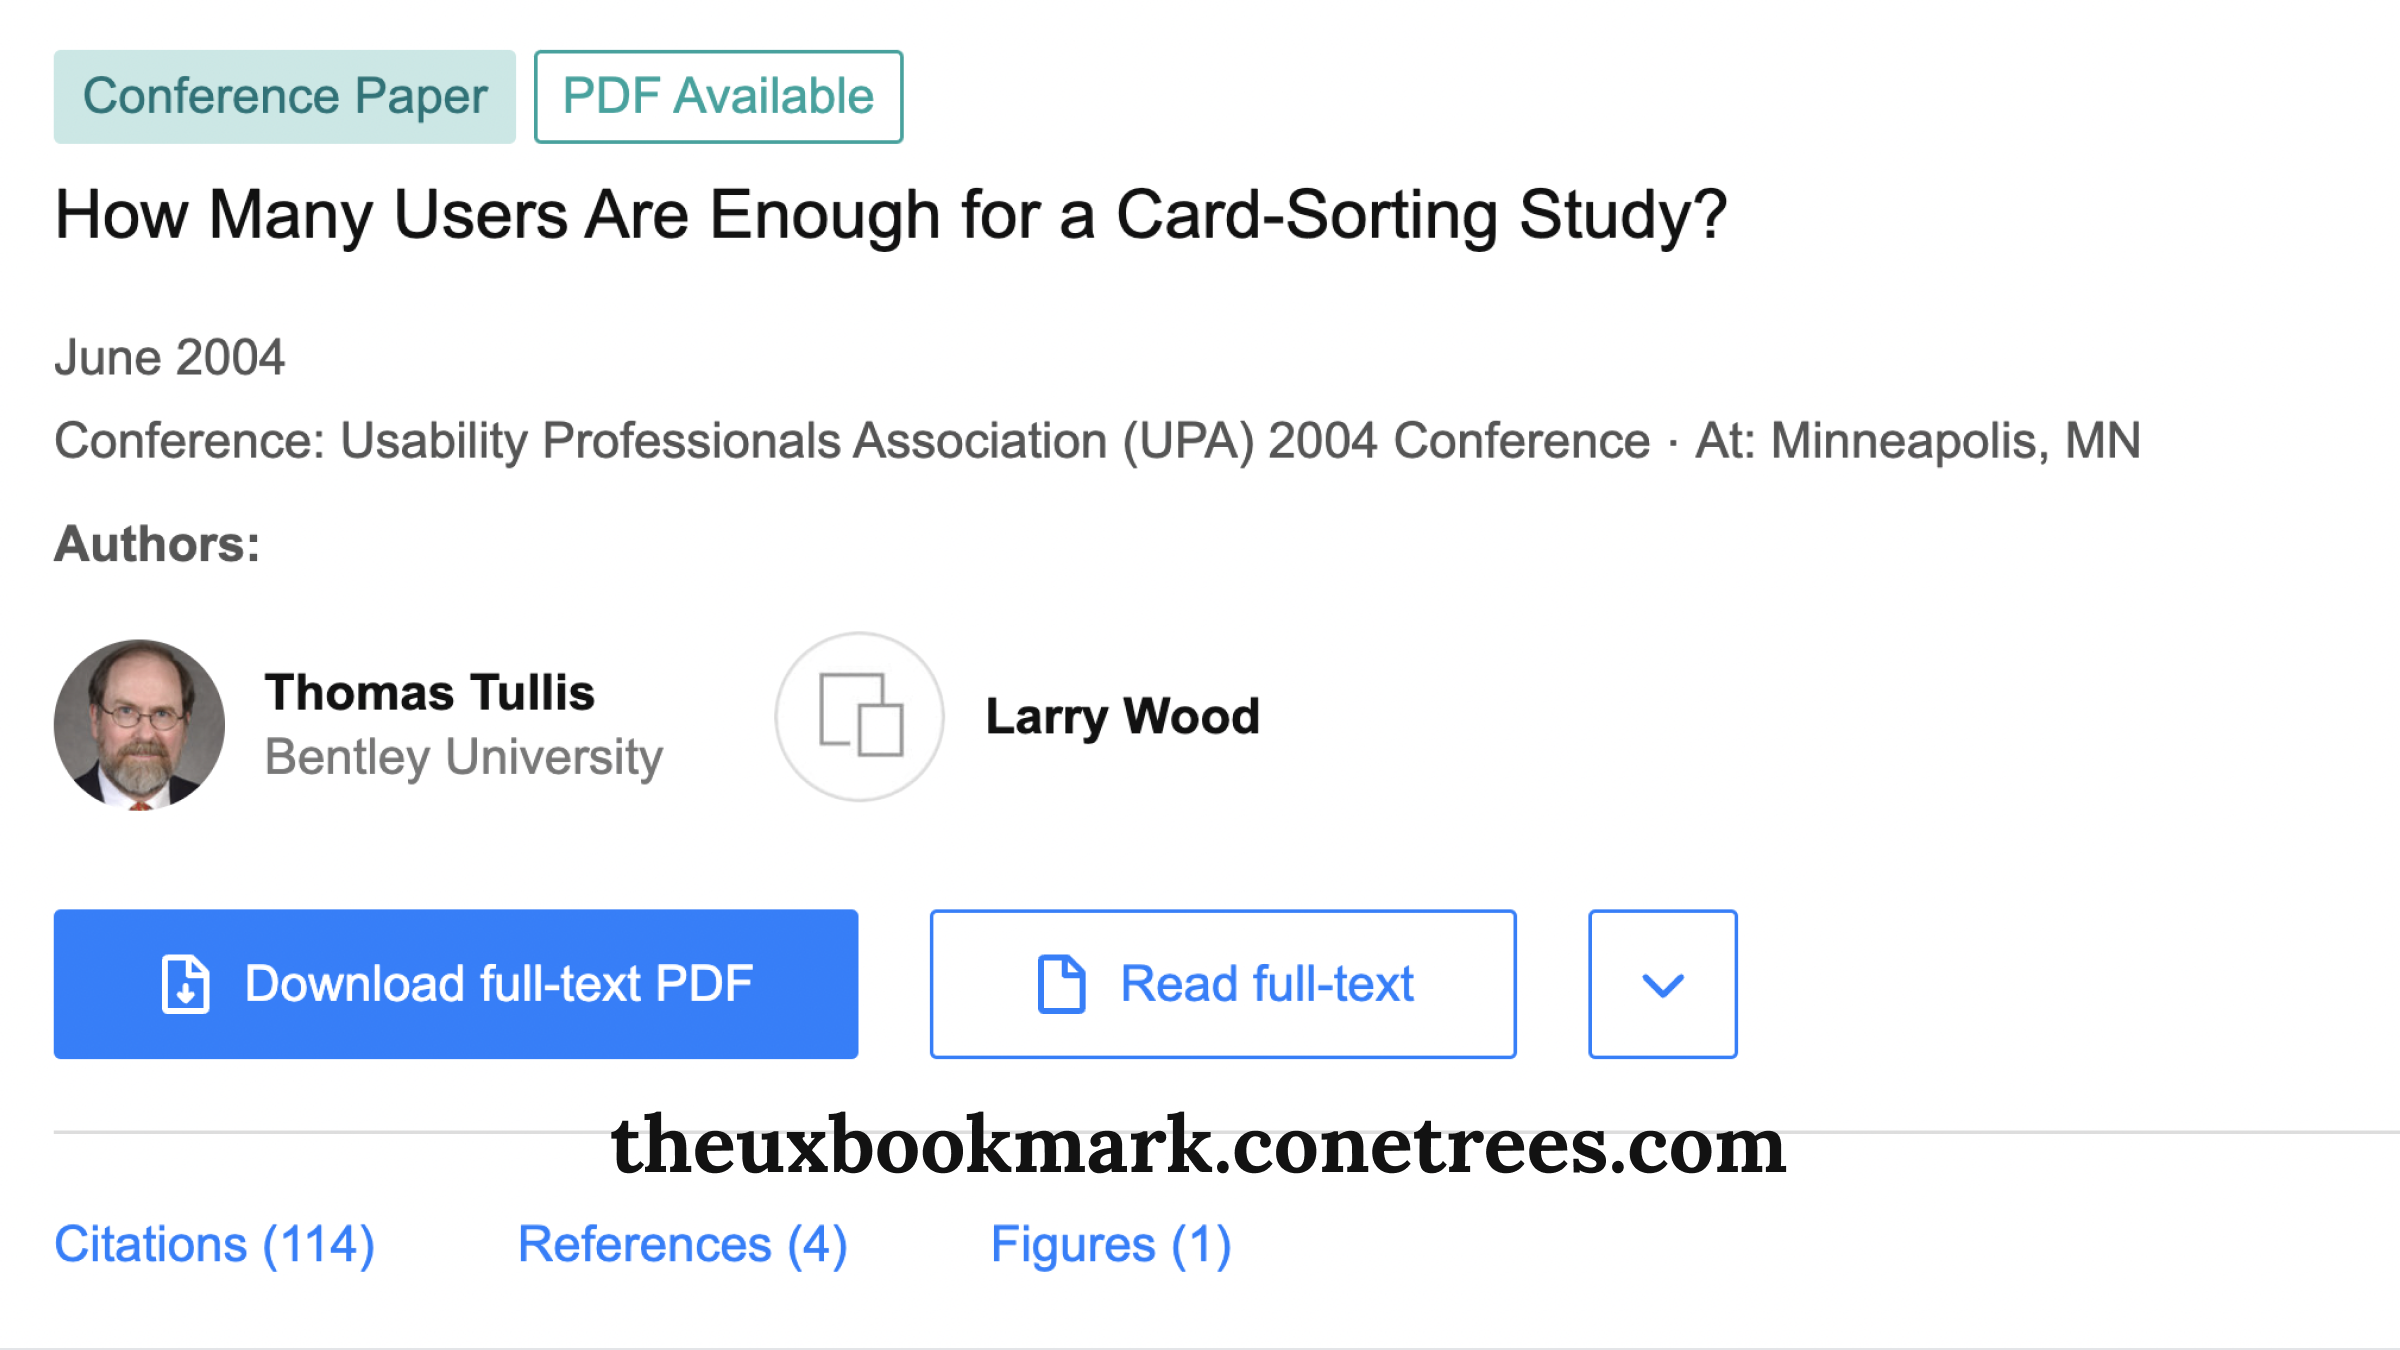 How Many Users Are Enough for a Card-Sorting Study?